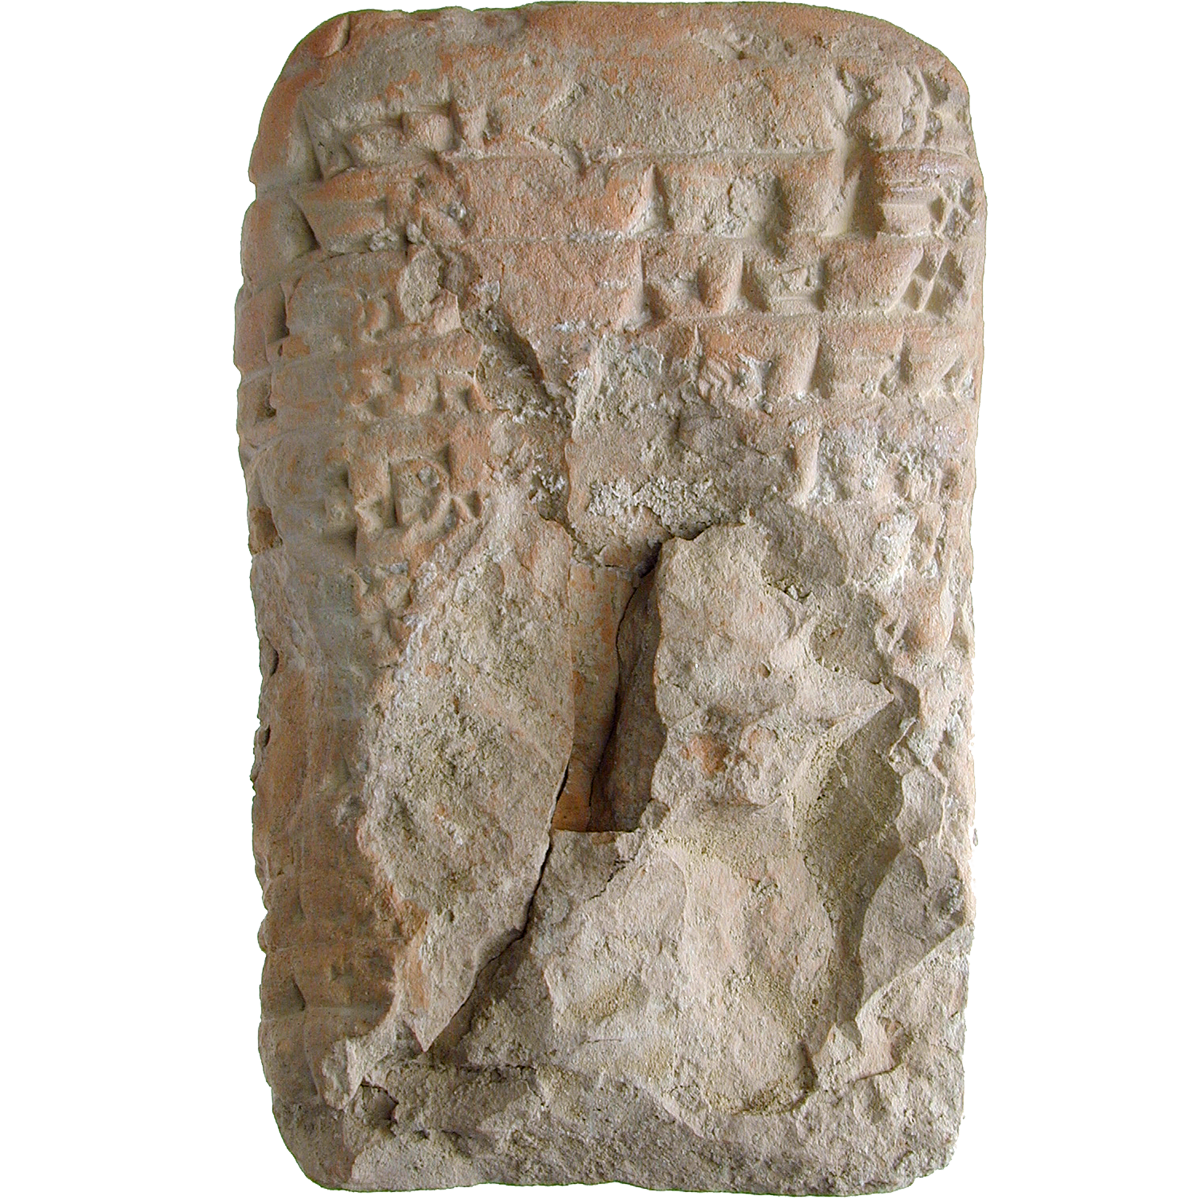 Mesopotamia, Old Akkadian Period, Clay Tablet with Cuneiform Writing (reverse)